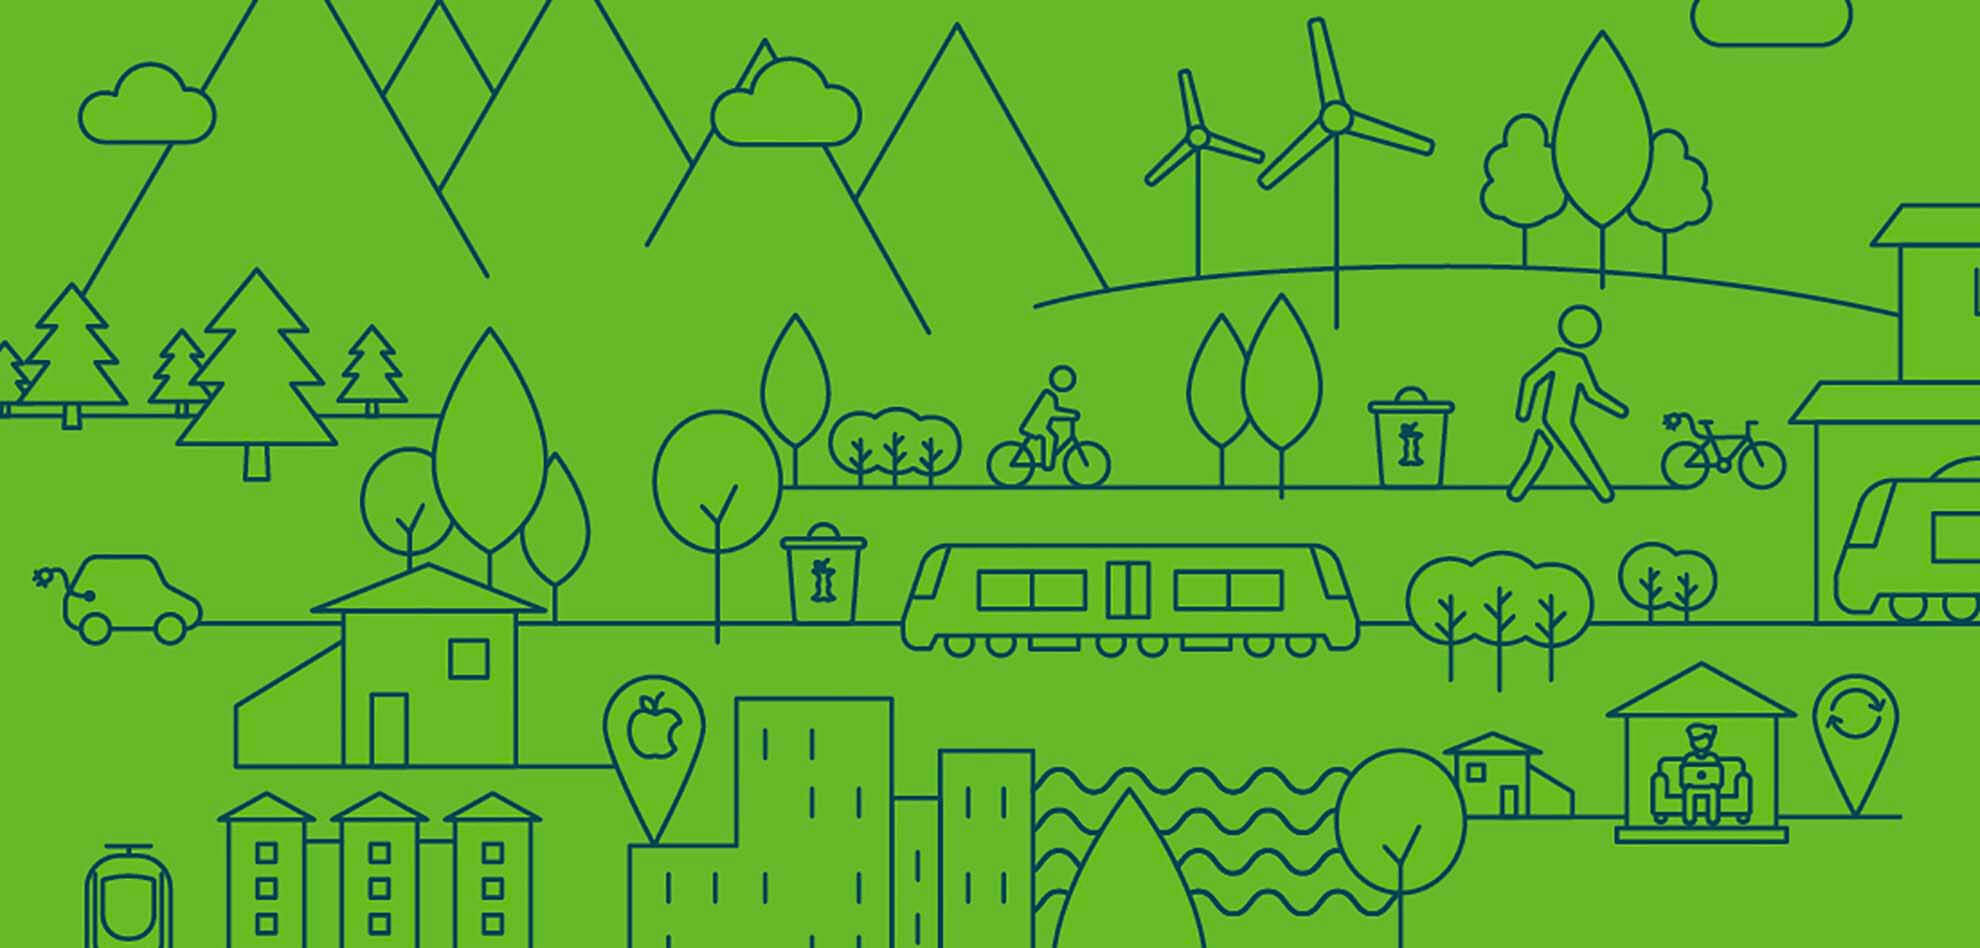 an illustration of different environmental symbols on a green background